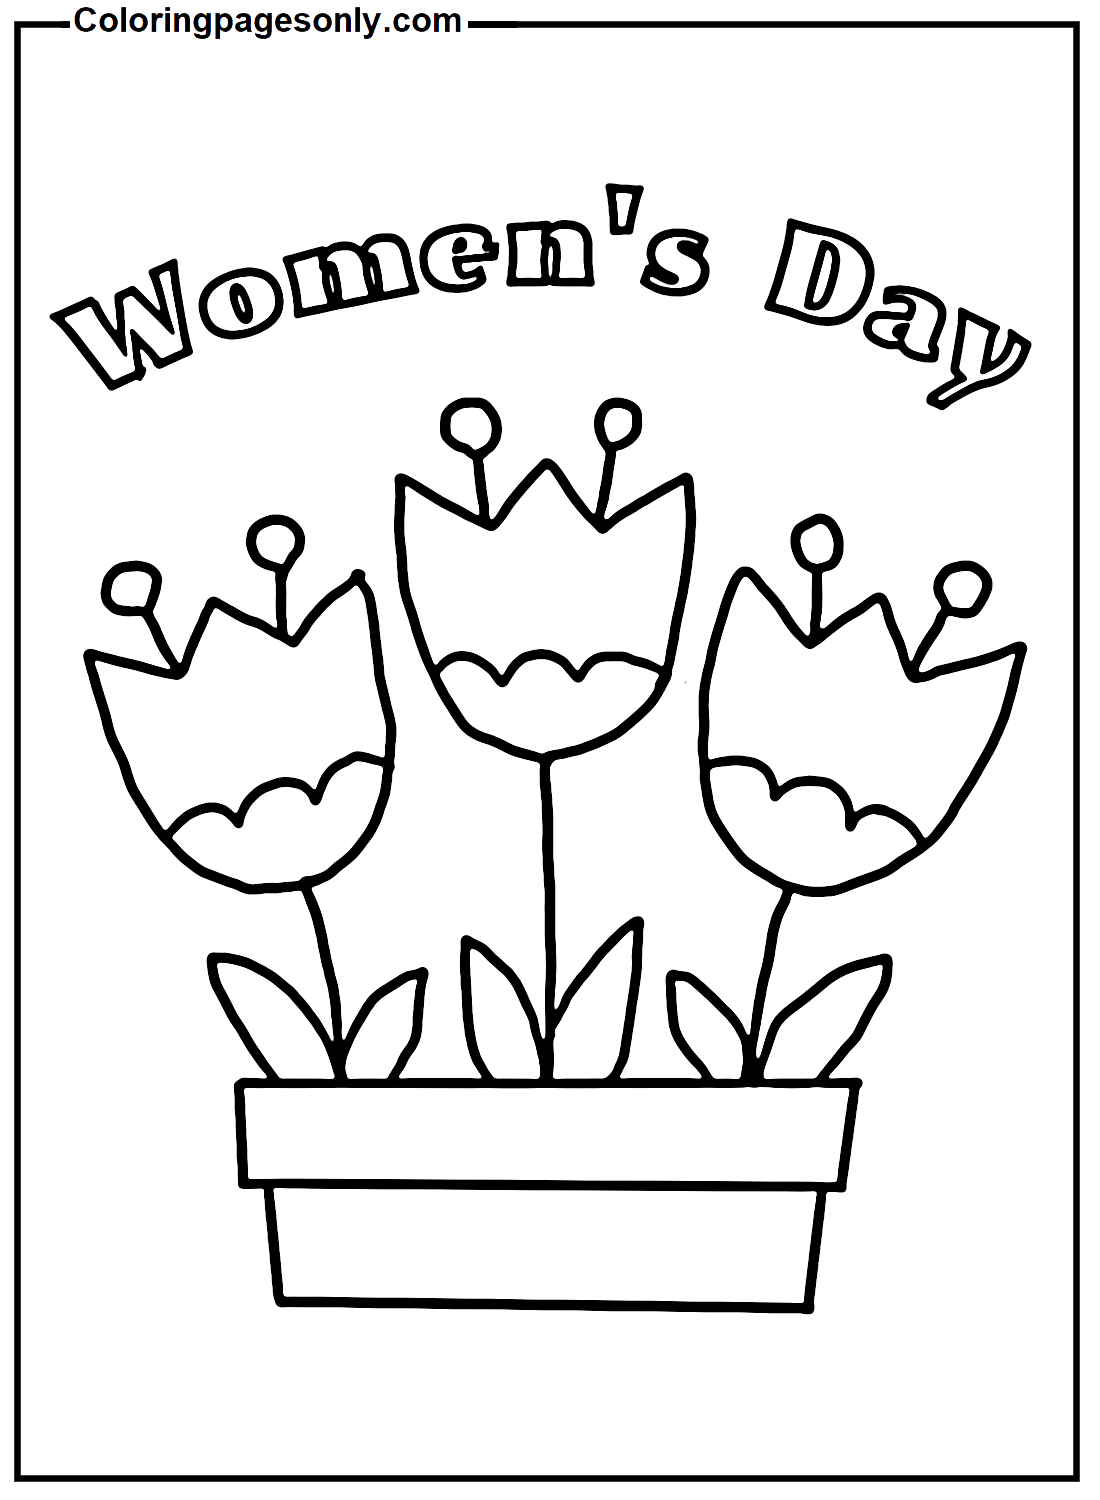 Women's Day Image Coloring Pages